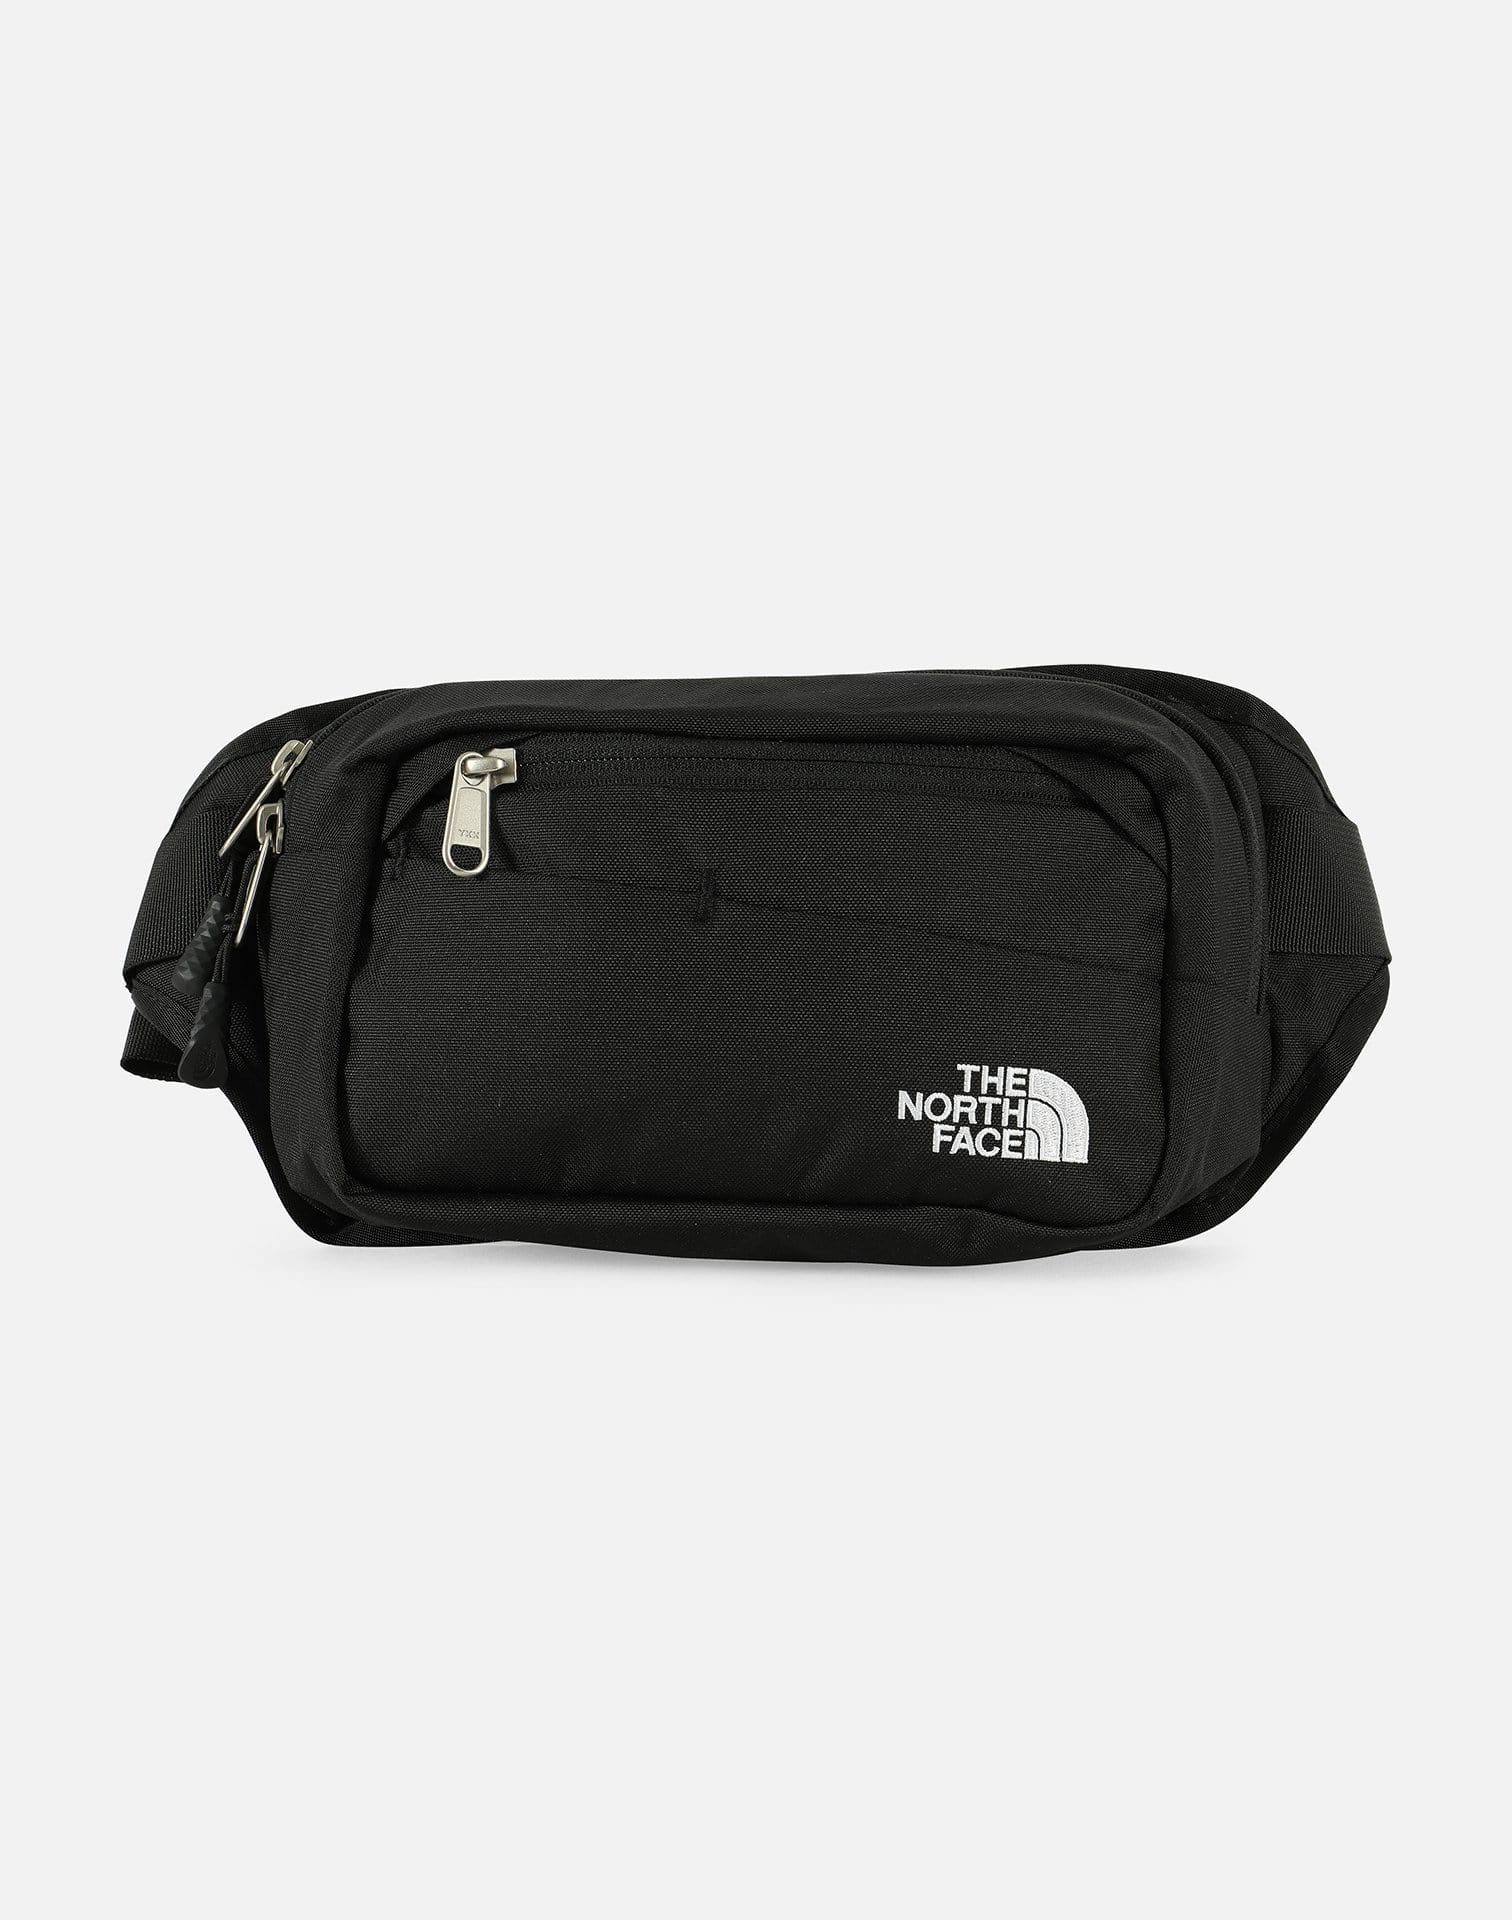 The North Face Bozer Hip Pack